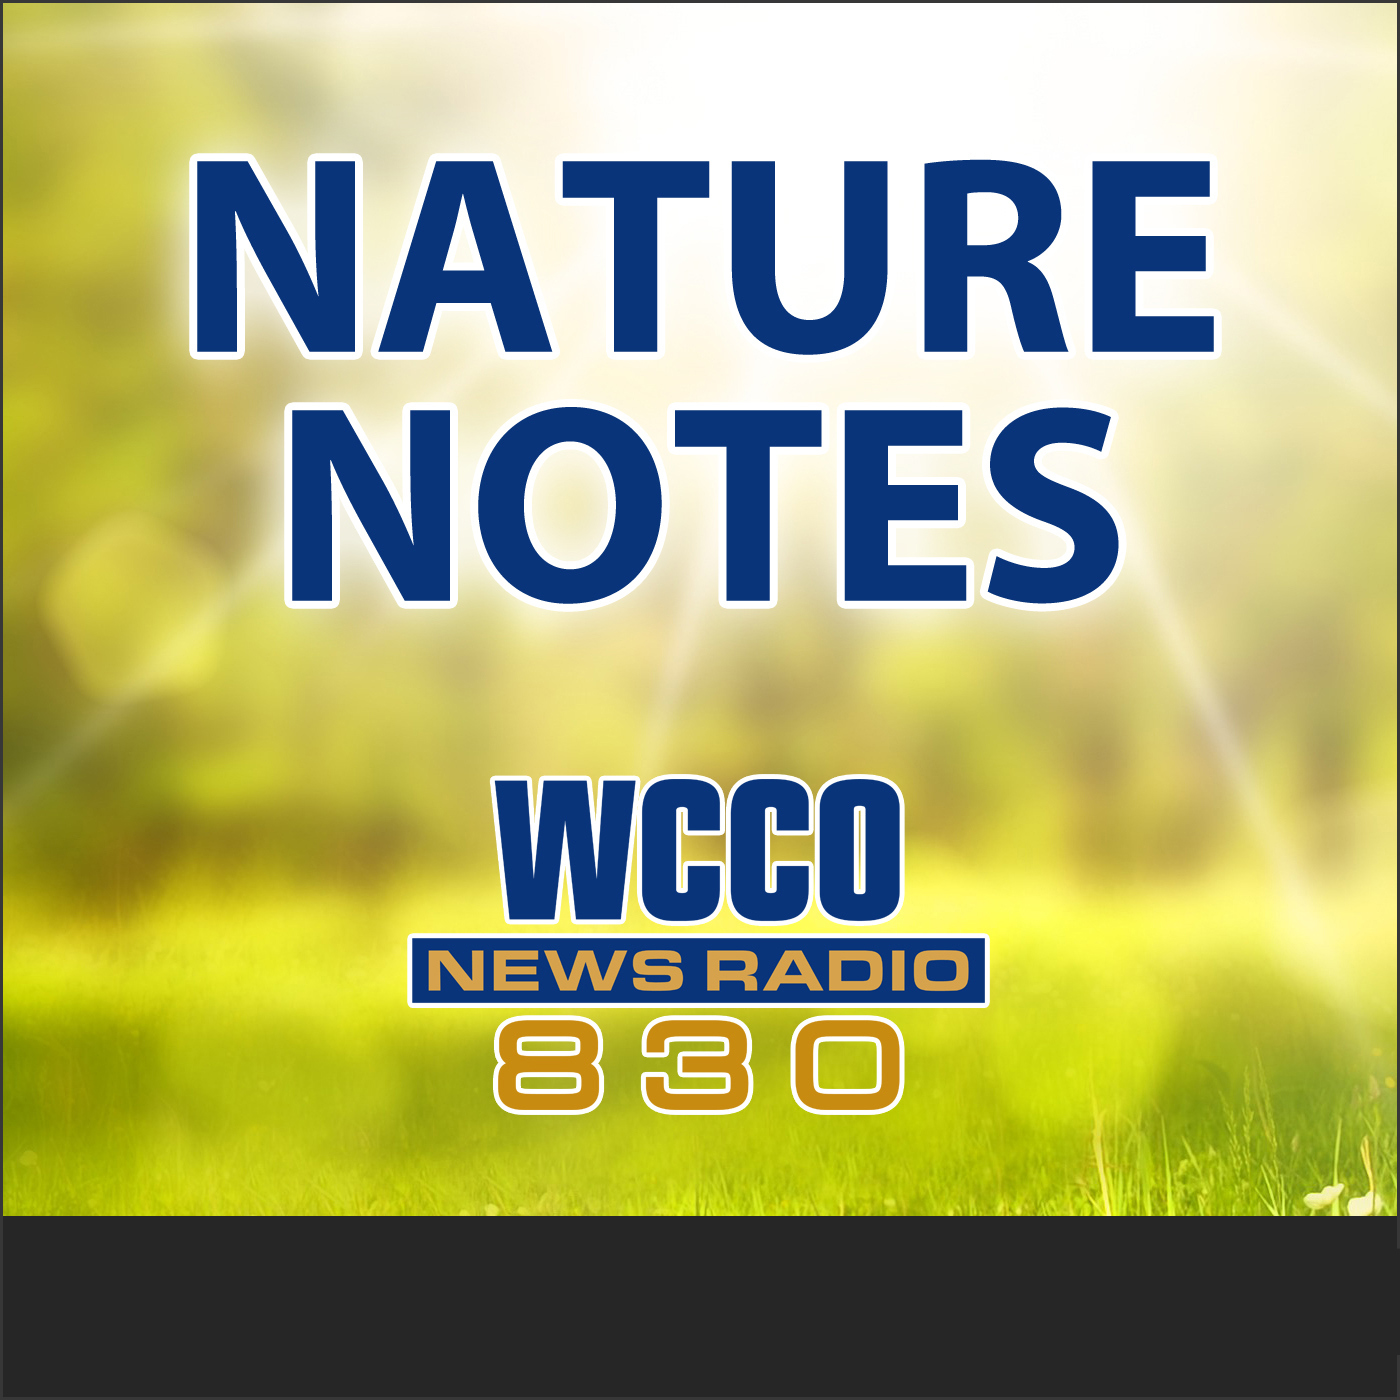 5-5-19 NATURE NOTES